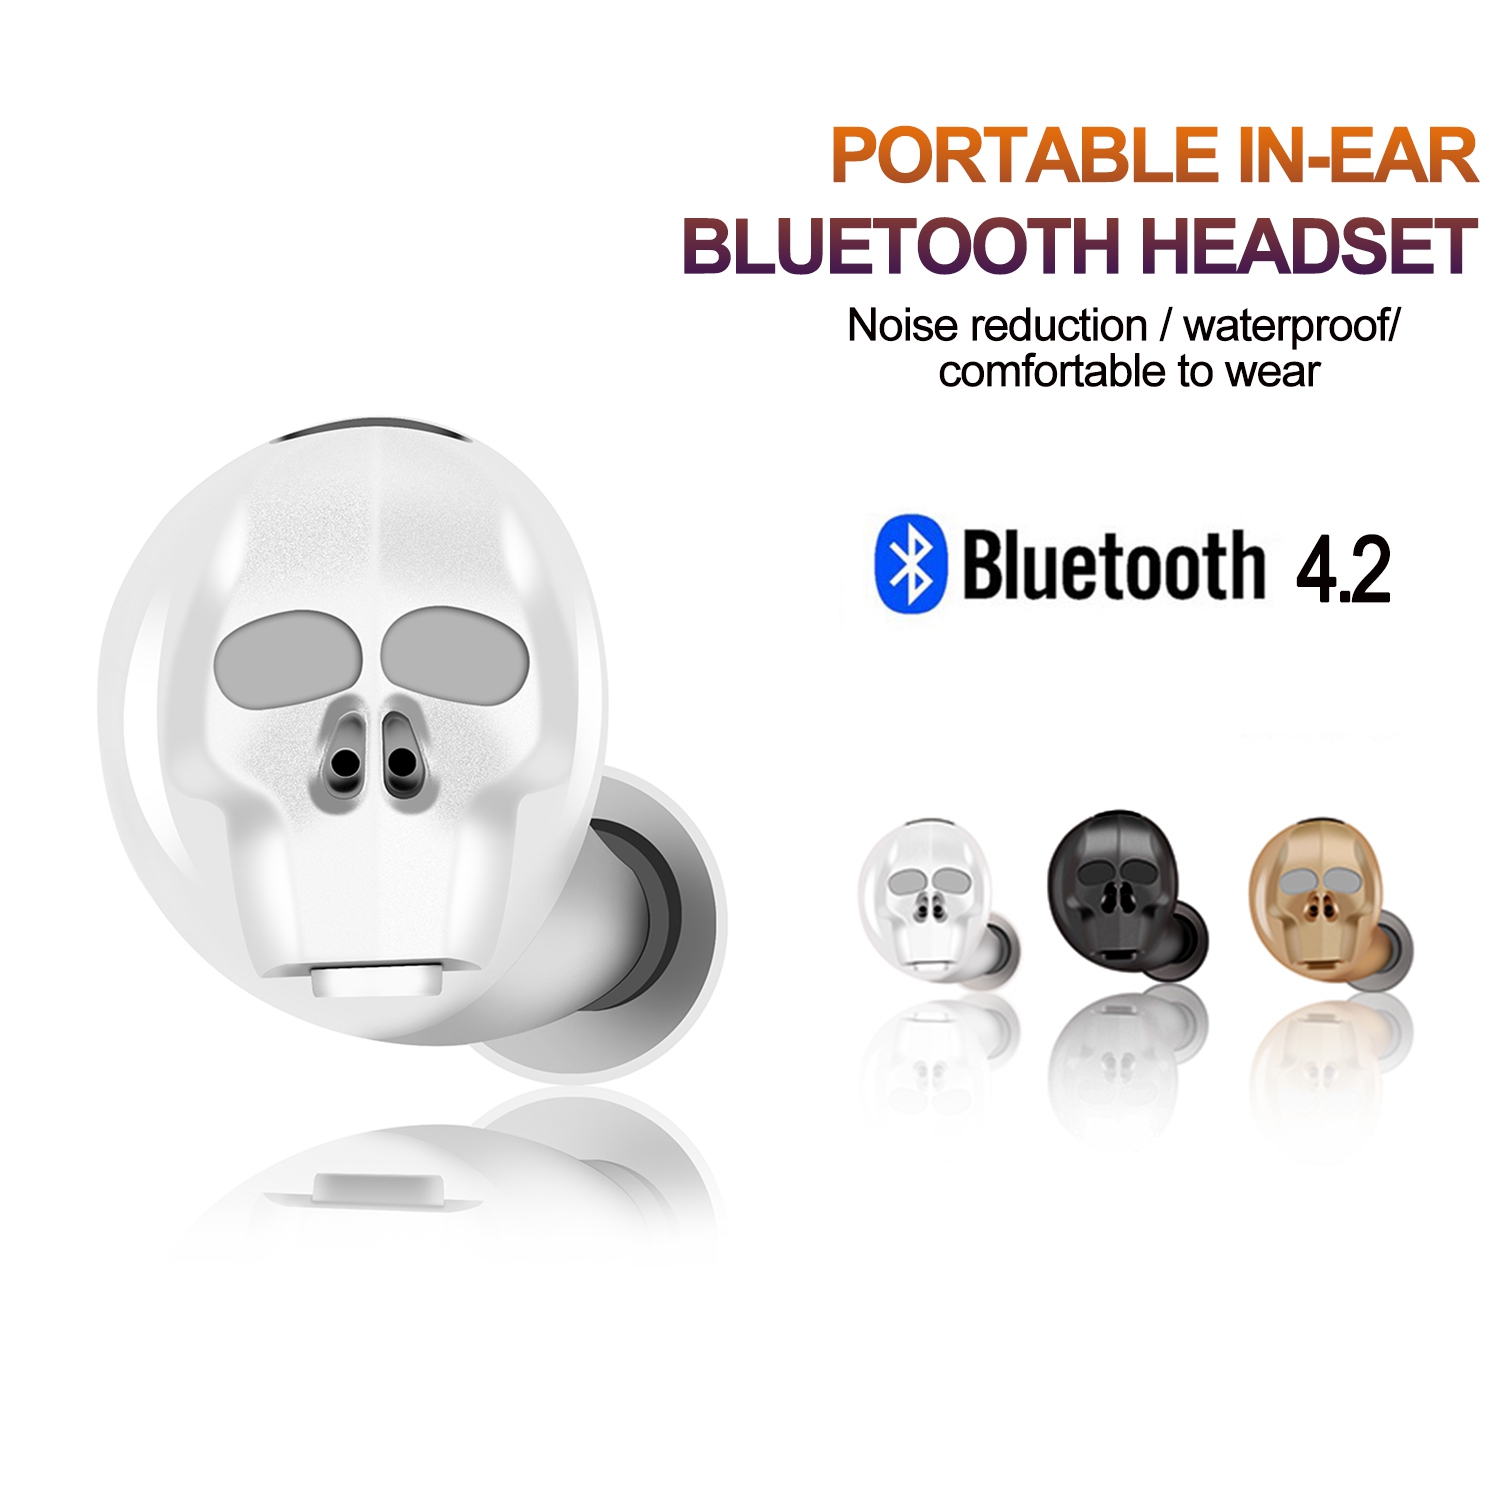 Wireless Bluetooth 4.2 Headset Stereo personality Headphones Earphone For IPhone Samsung HTC